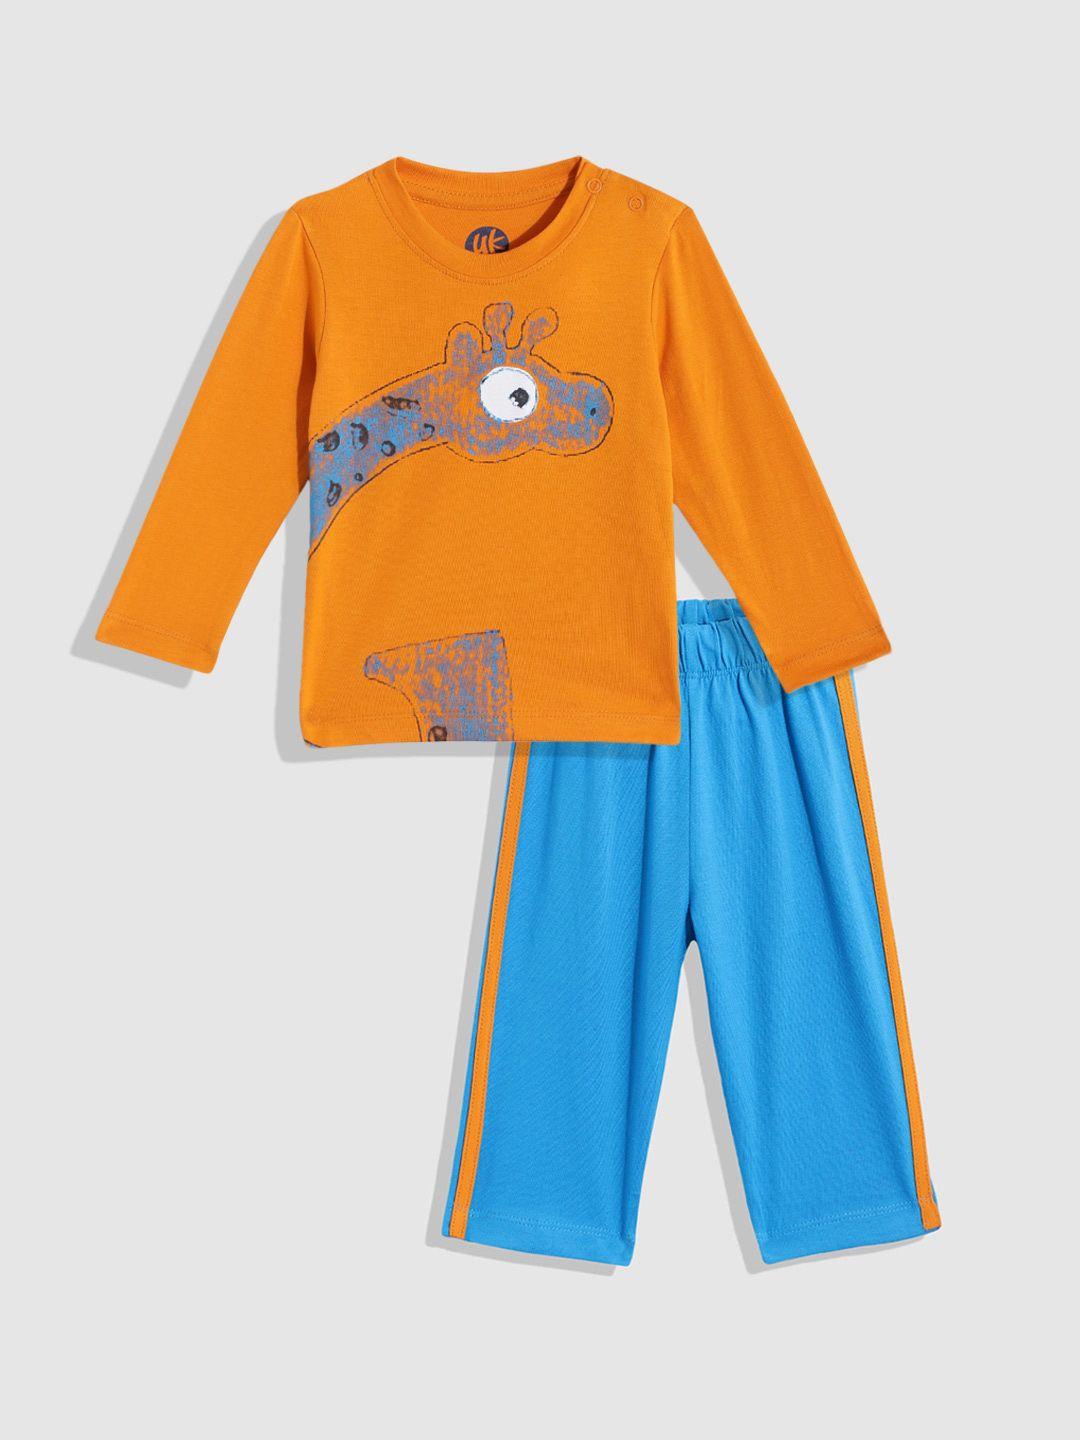 yk infant boys orange & blue printed cotton t-shirt with trousers